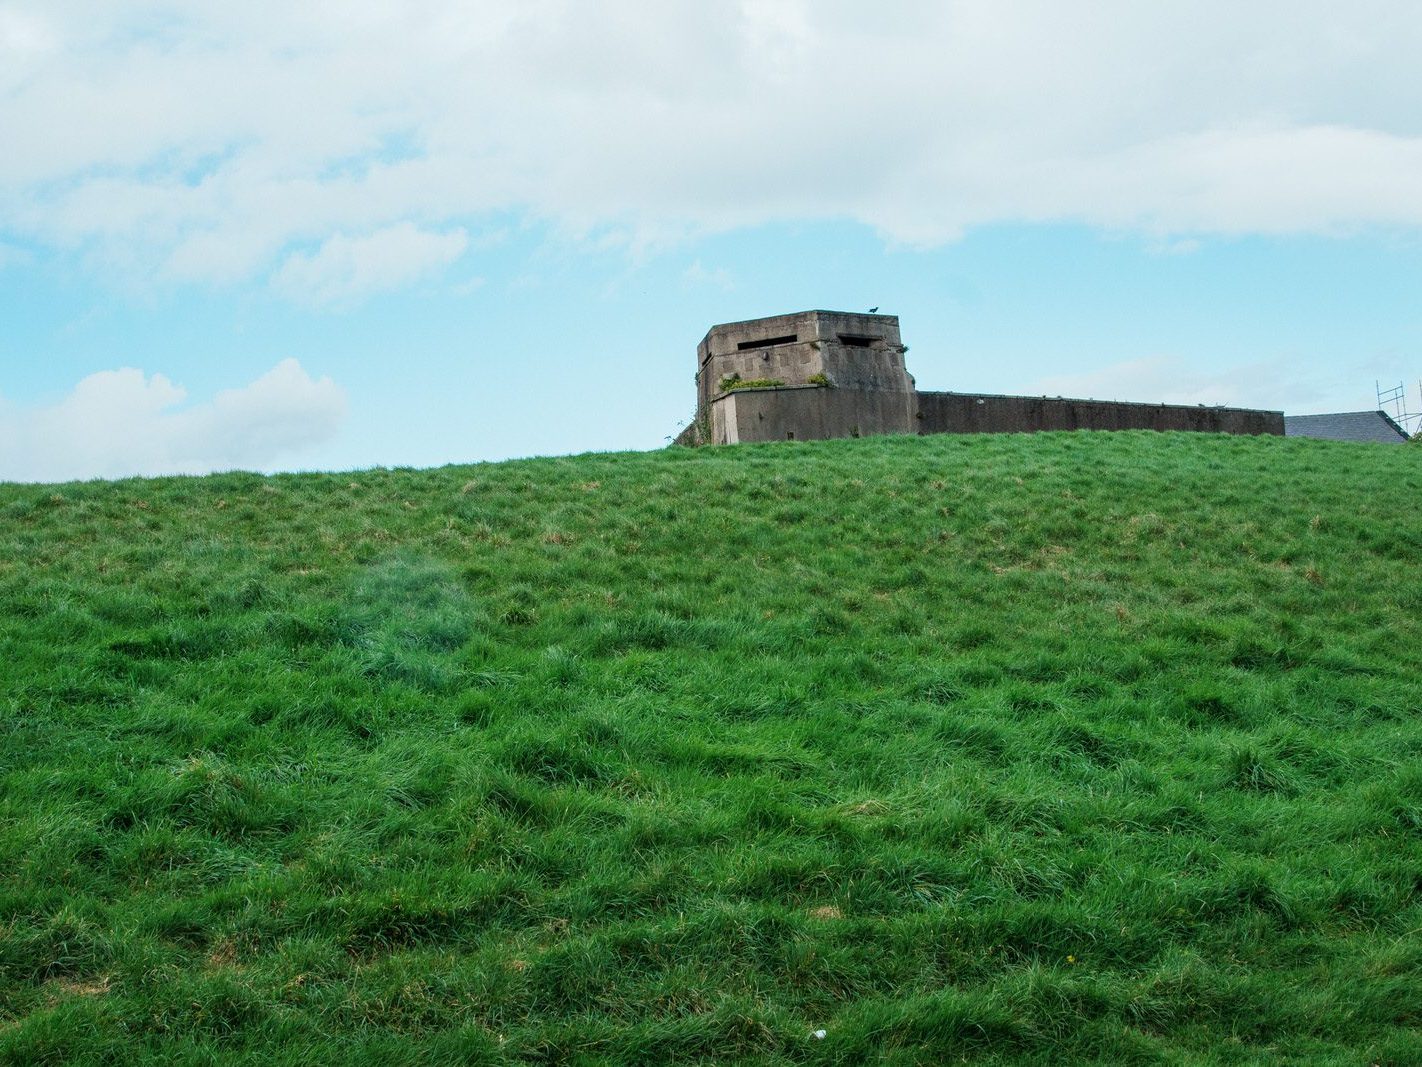 THE MAGAZINE FORT IN PHOENIX PARK [THERE IS MUCH INFORMATION AND A COMPLICATED STORY]-223515-1